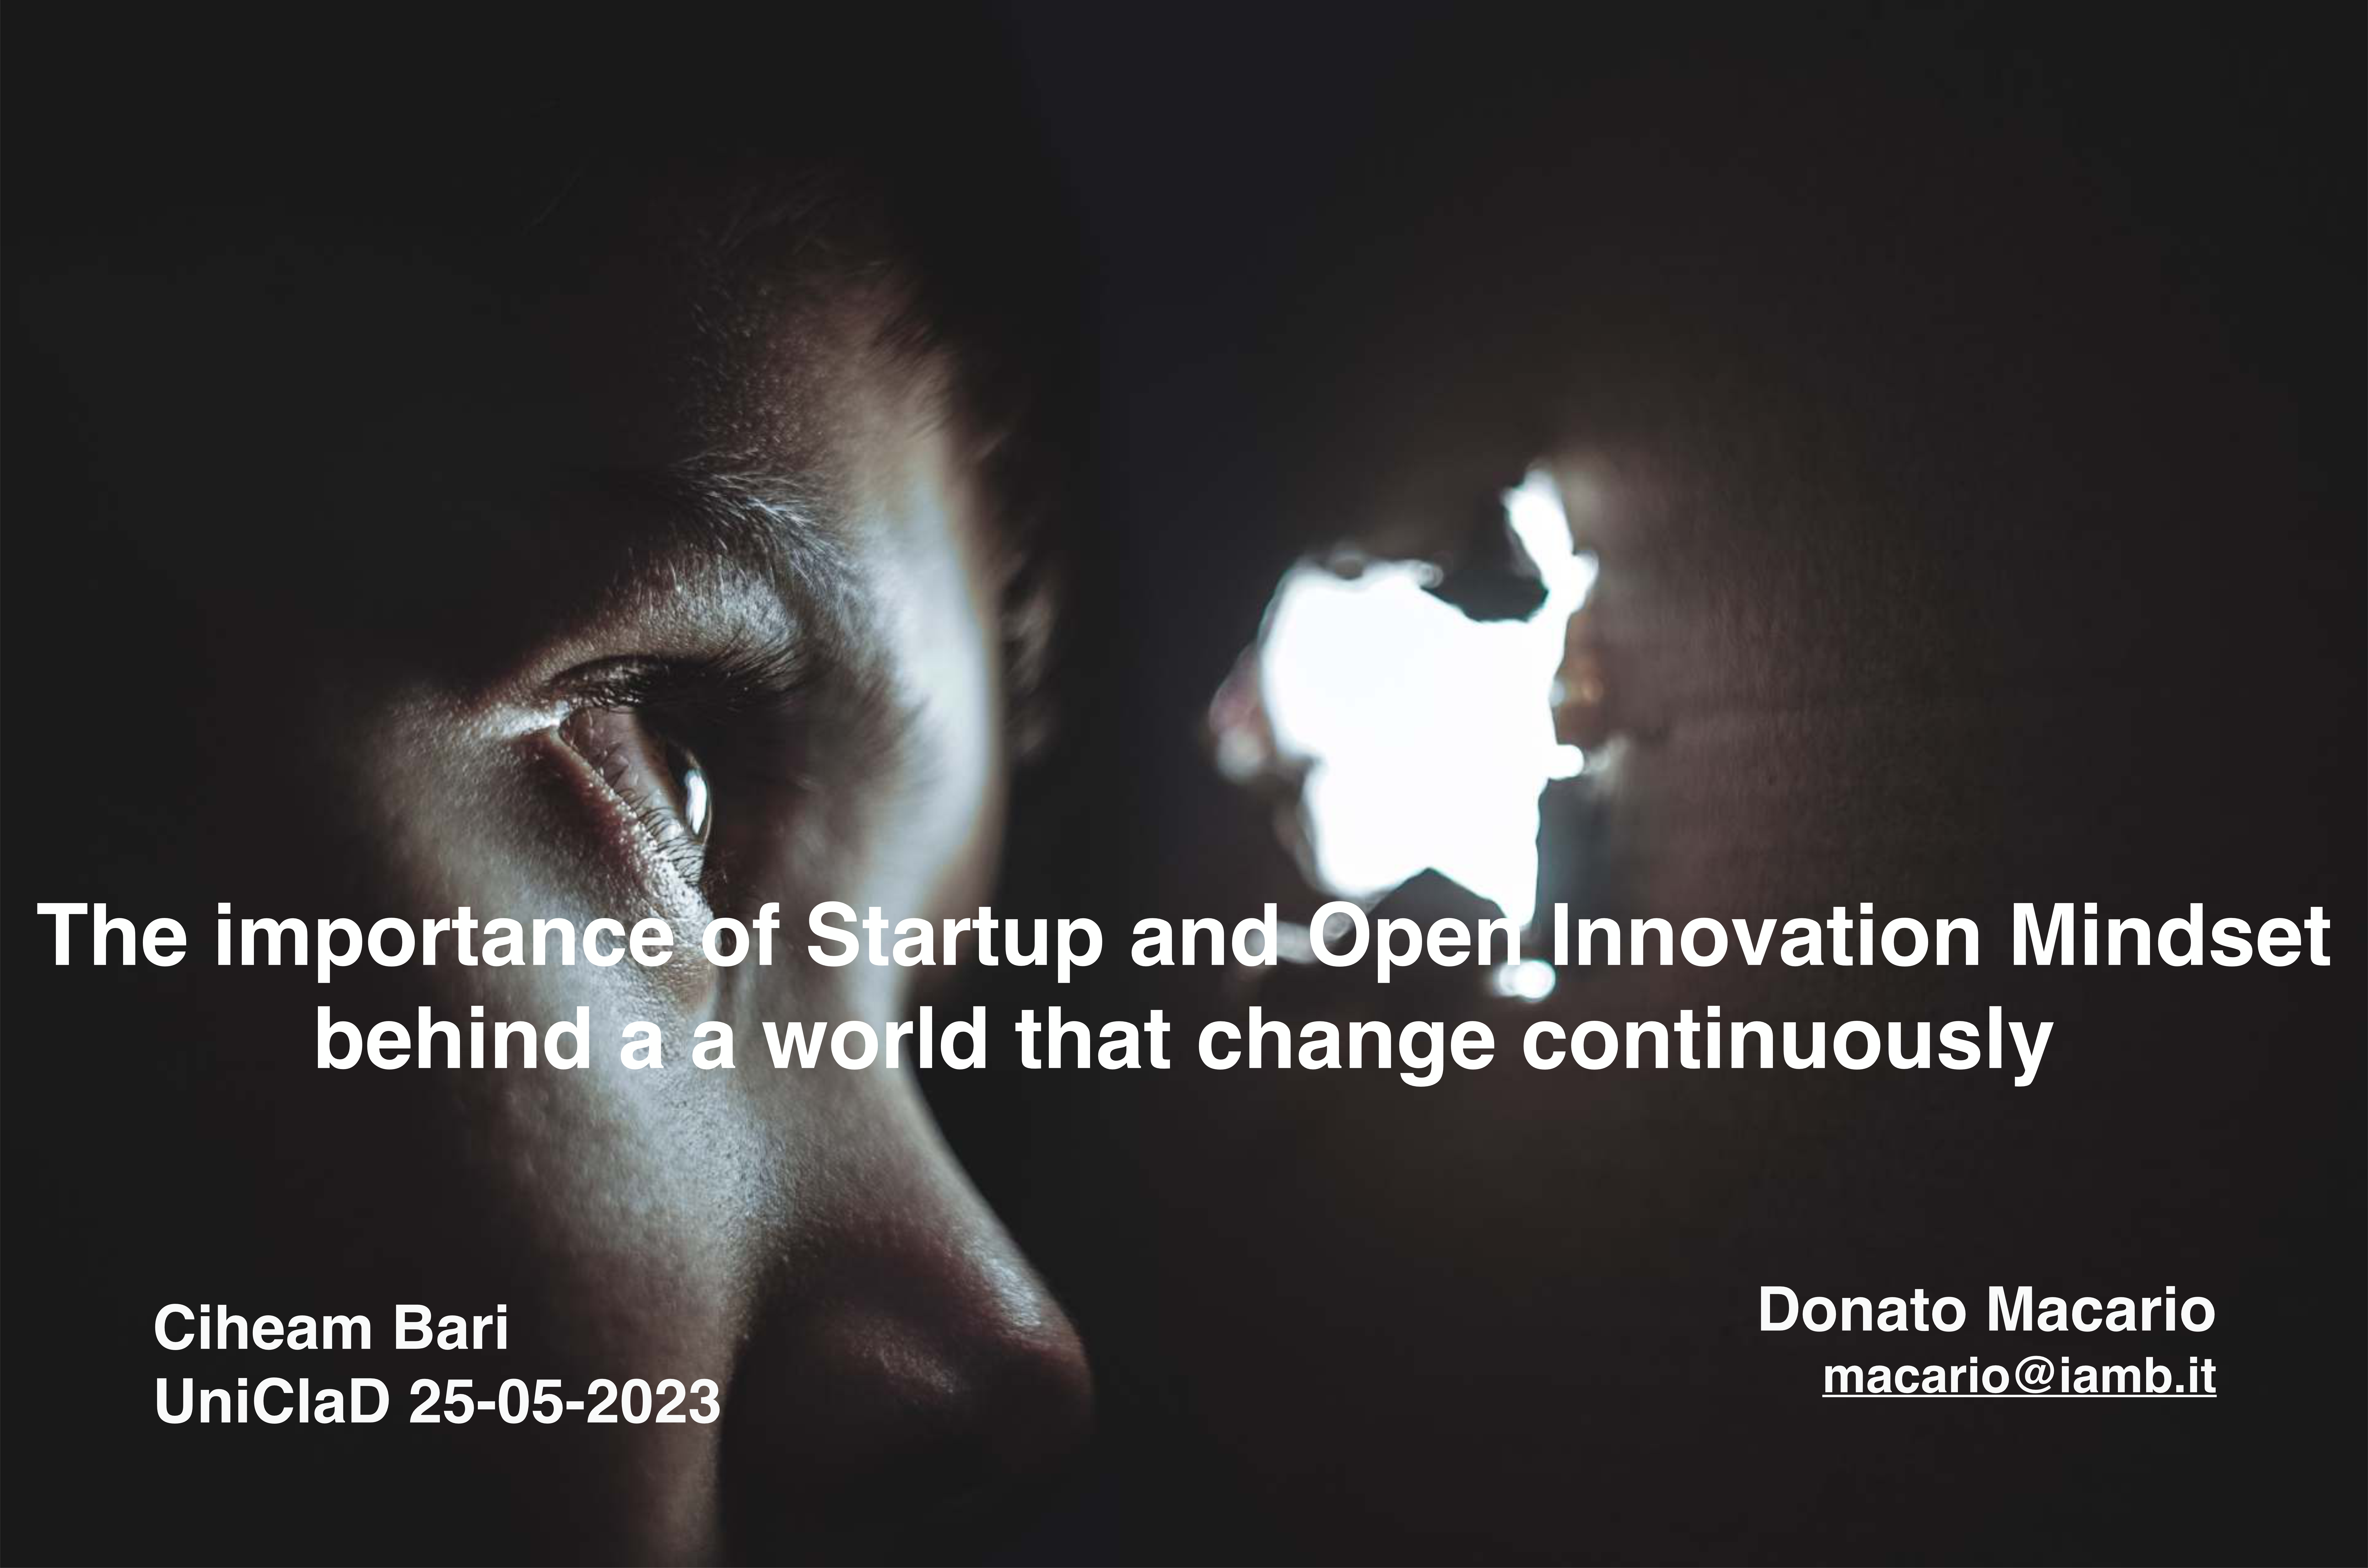 The importance of Startup and Open Innovation Mindset behind a a world that change continuously